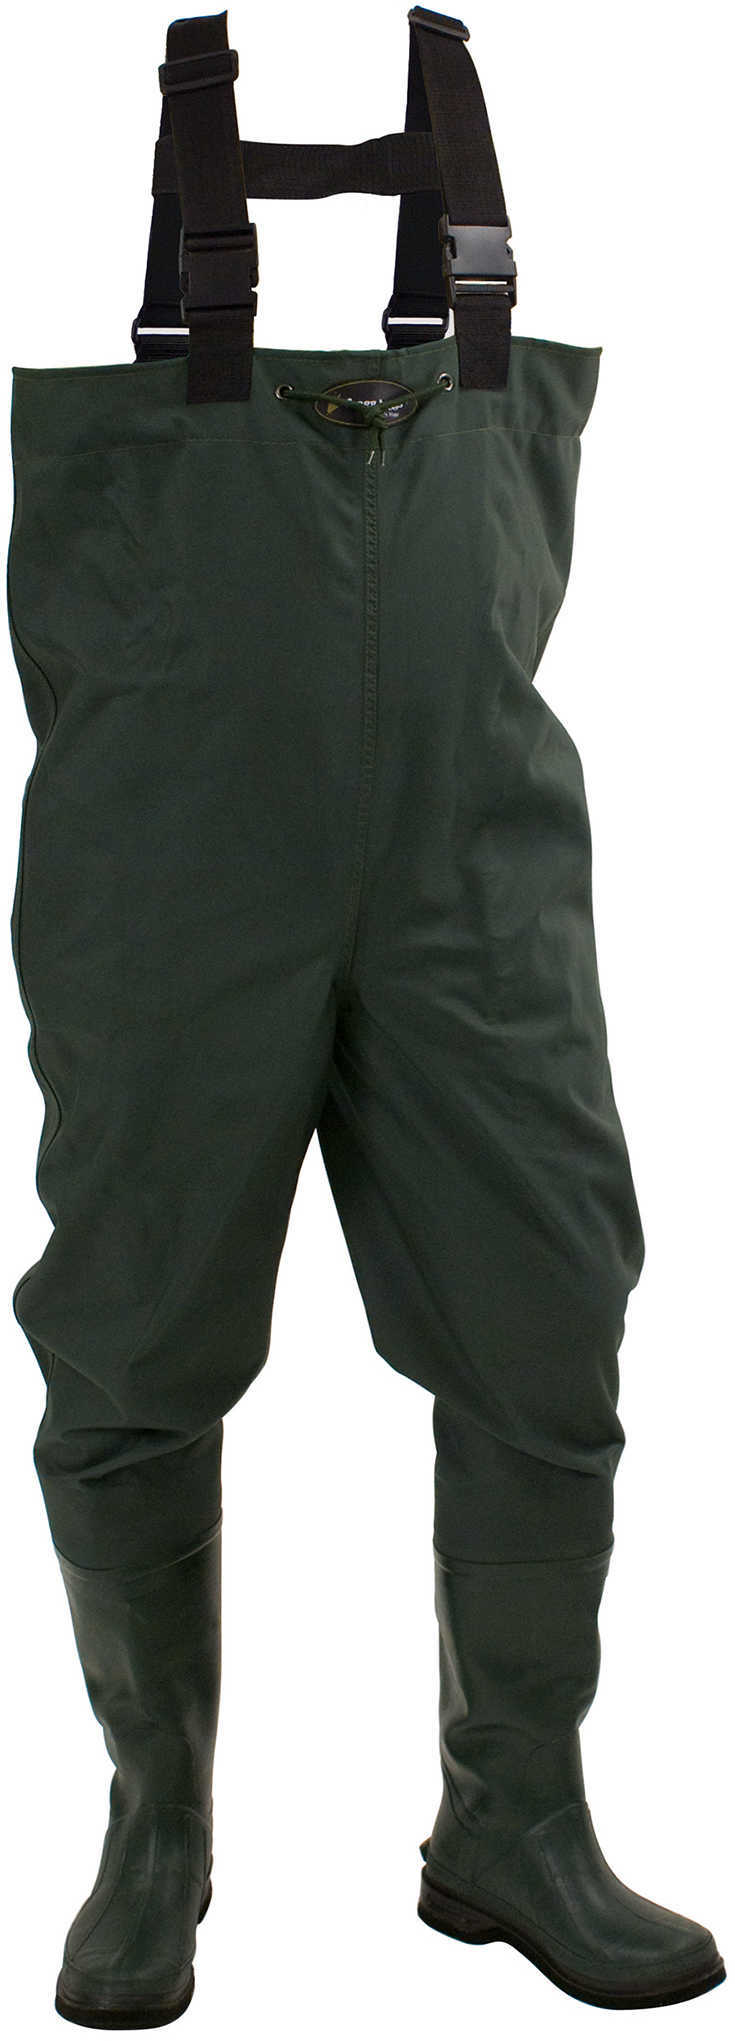 Frogg Toggs Wader Forest Green Cleated Size 13 271524313